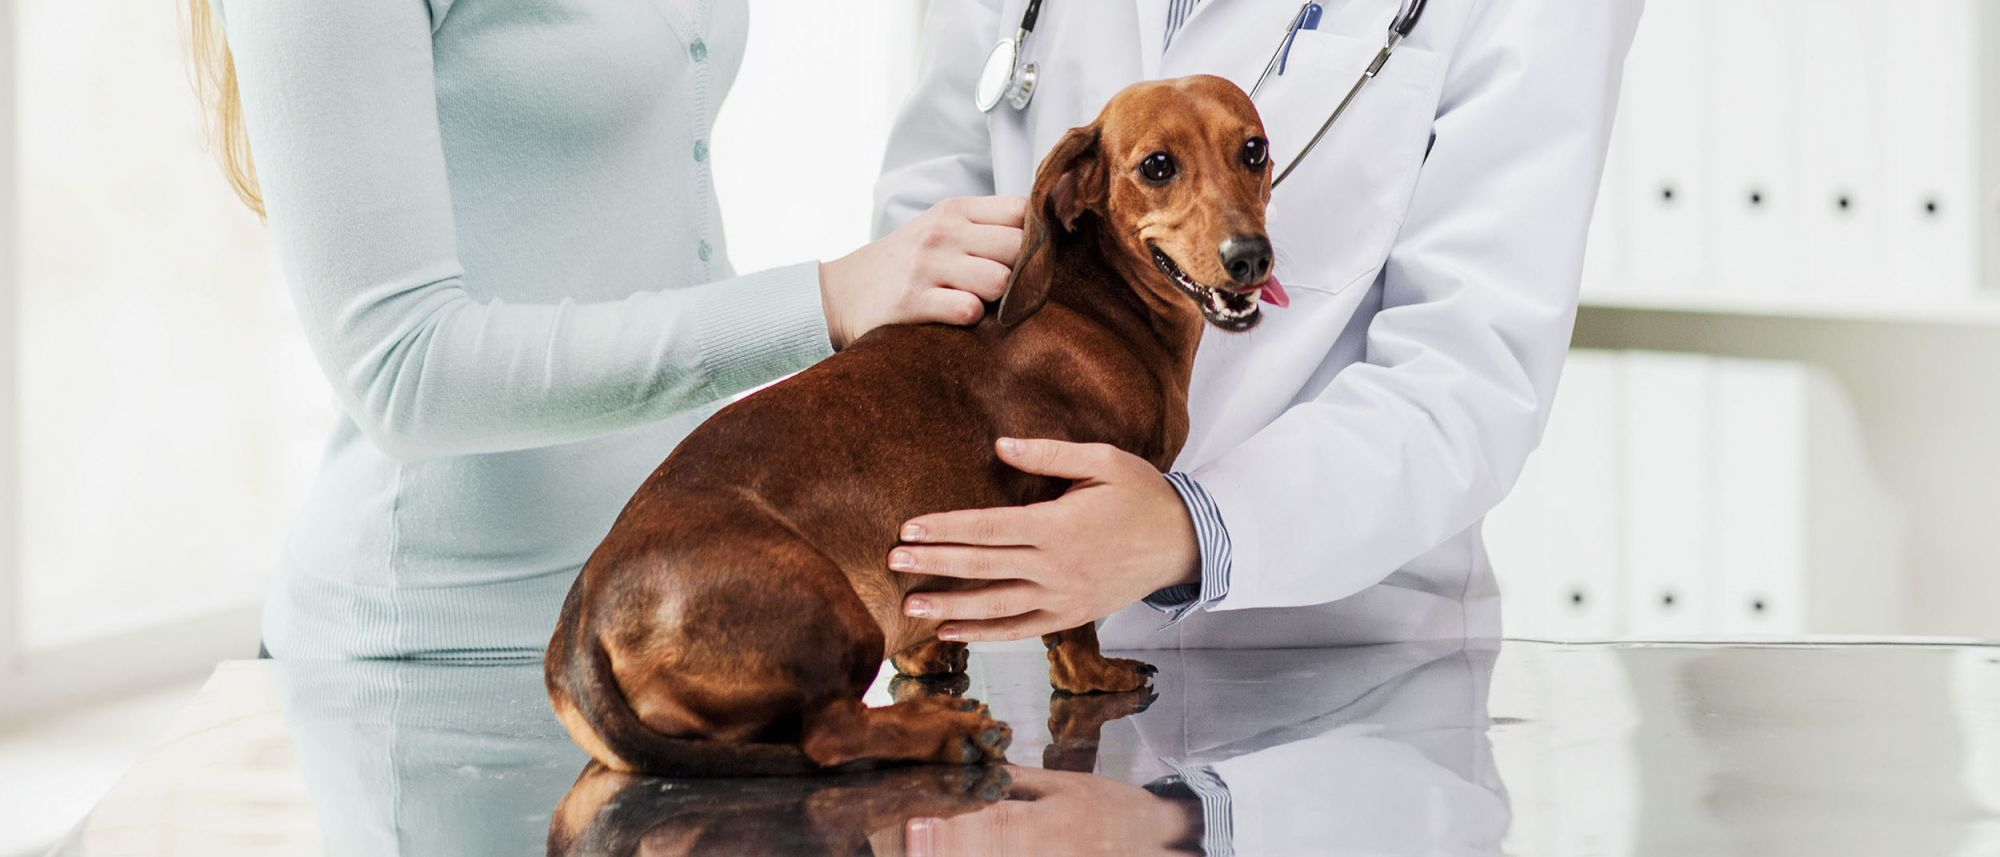 Adult Dachshund sitting on an examination table while owner speaks to a vet